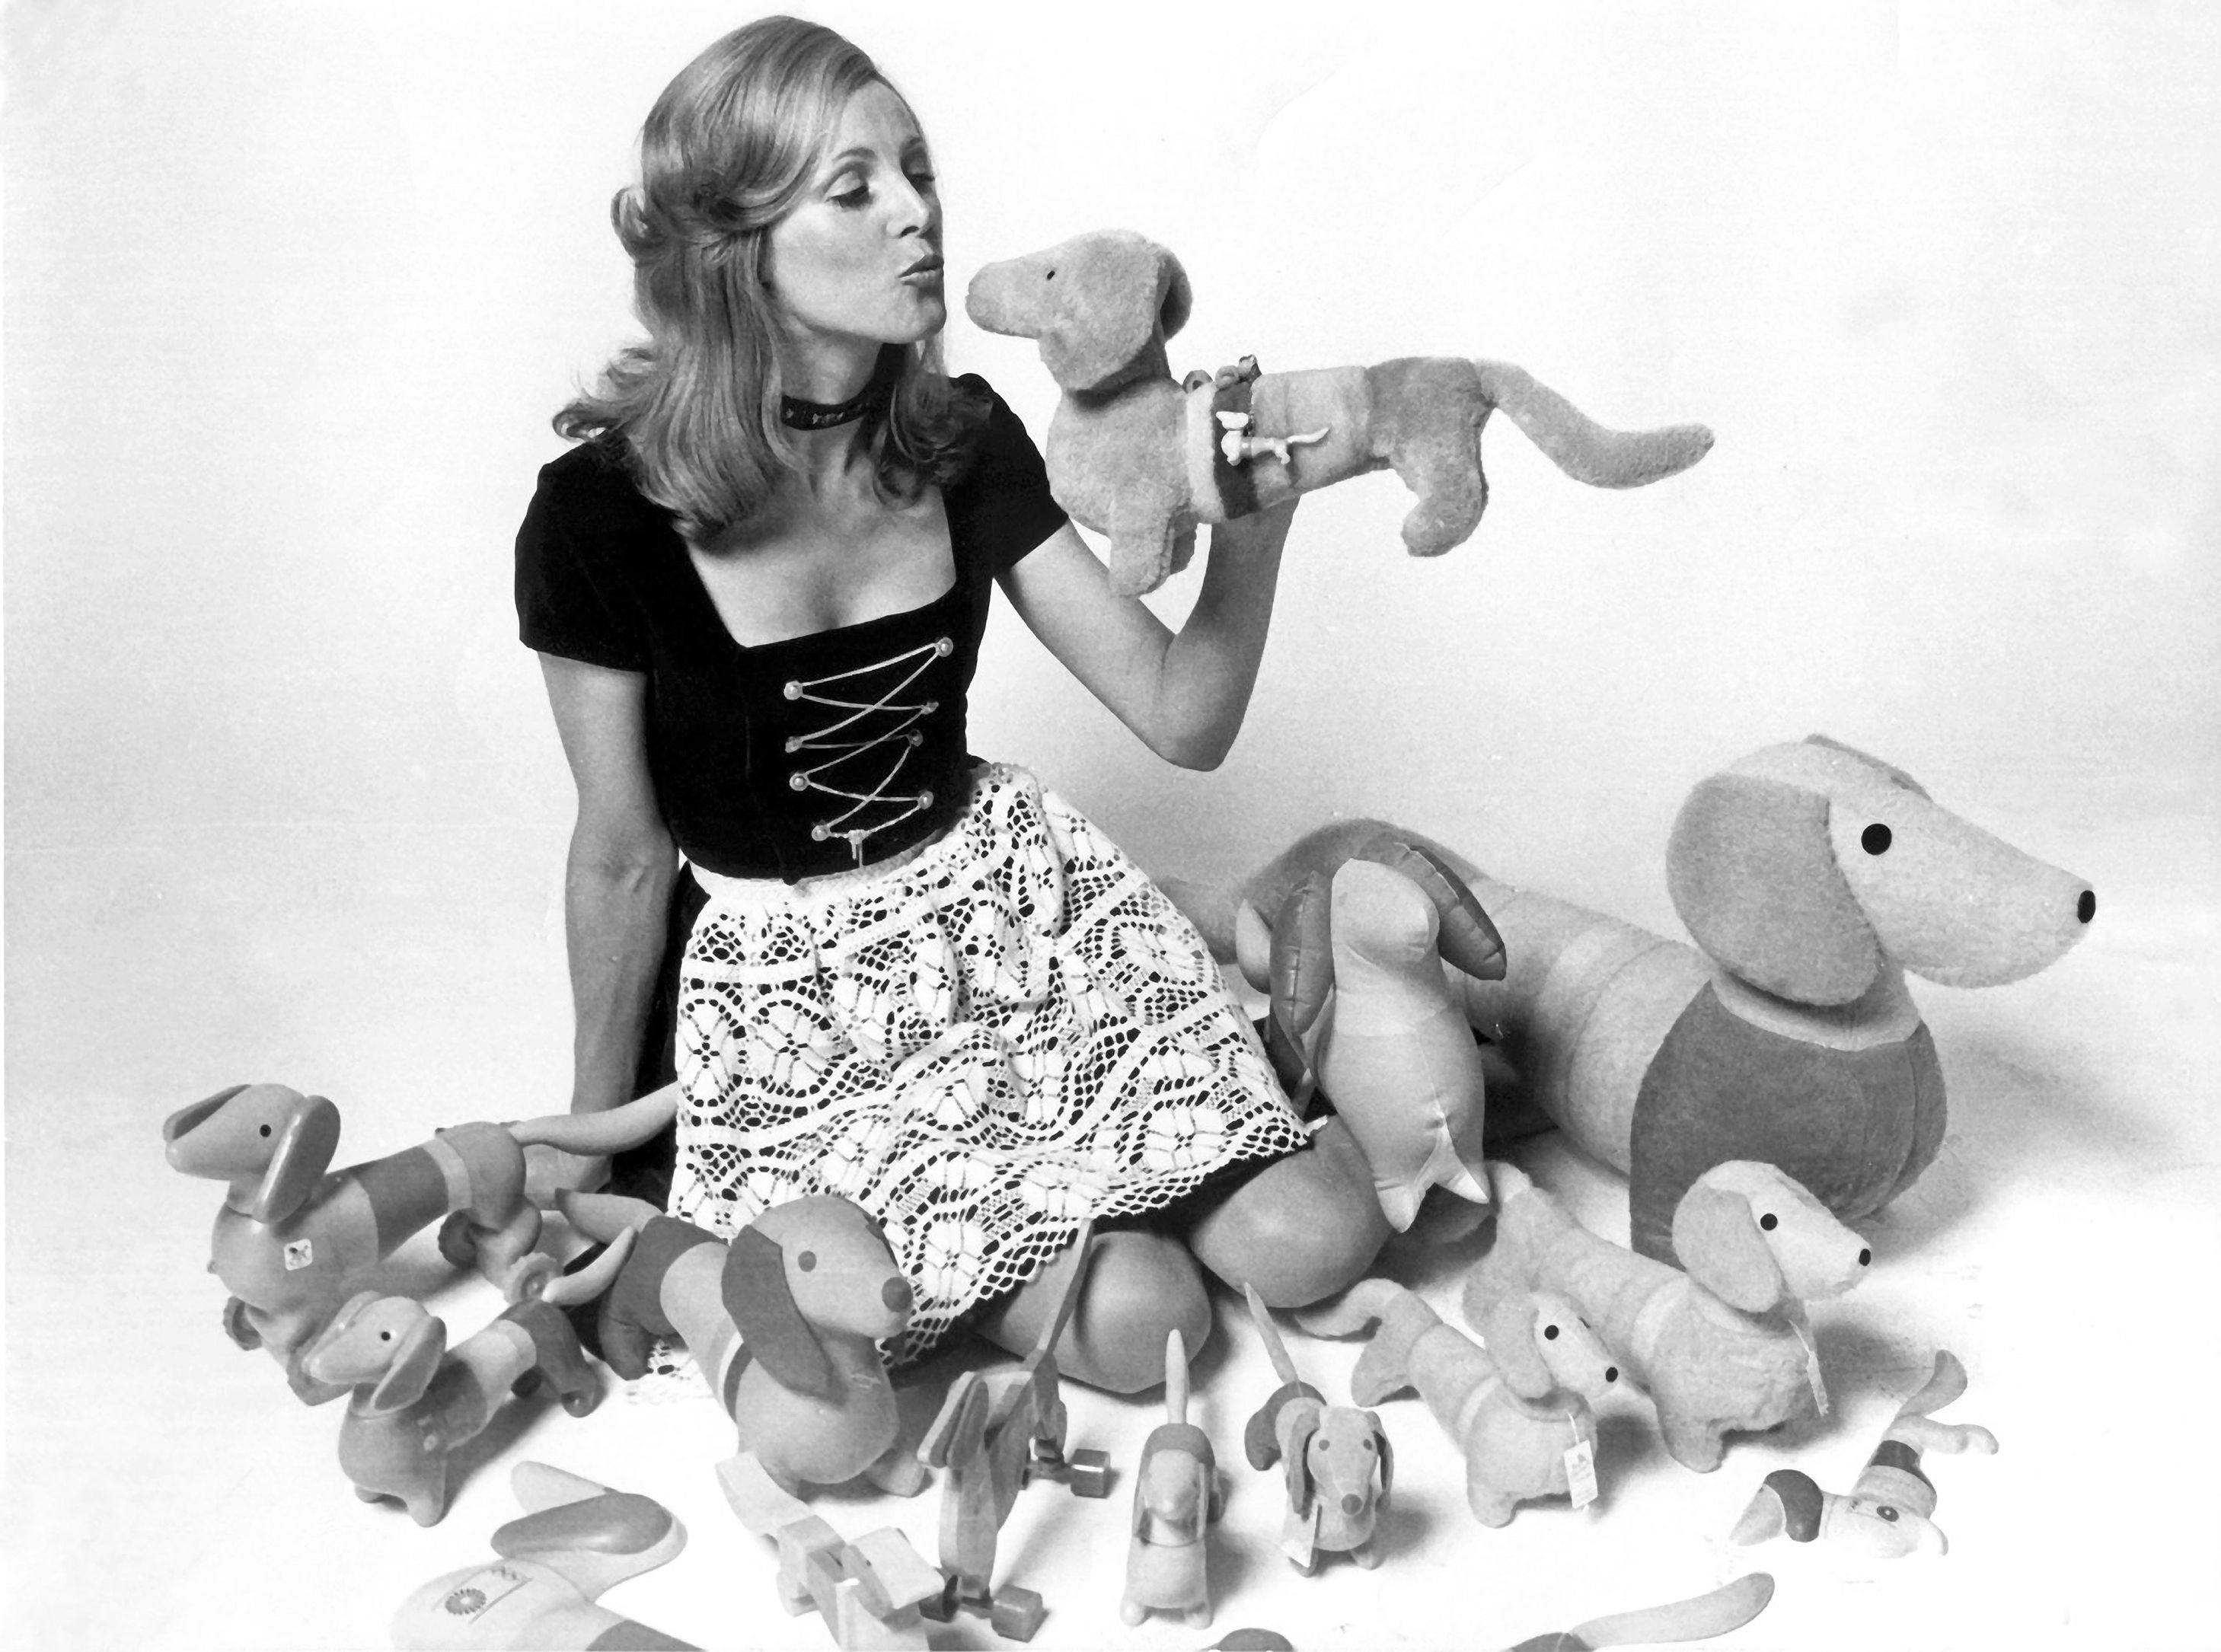 Uschi Badenberg poses with a soft toy collection of the Olympic Games 1972 mascot
Waldi, 1971. Foto Hollandse Hoogte / dpa Olympia 